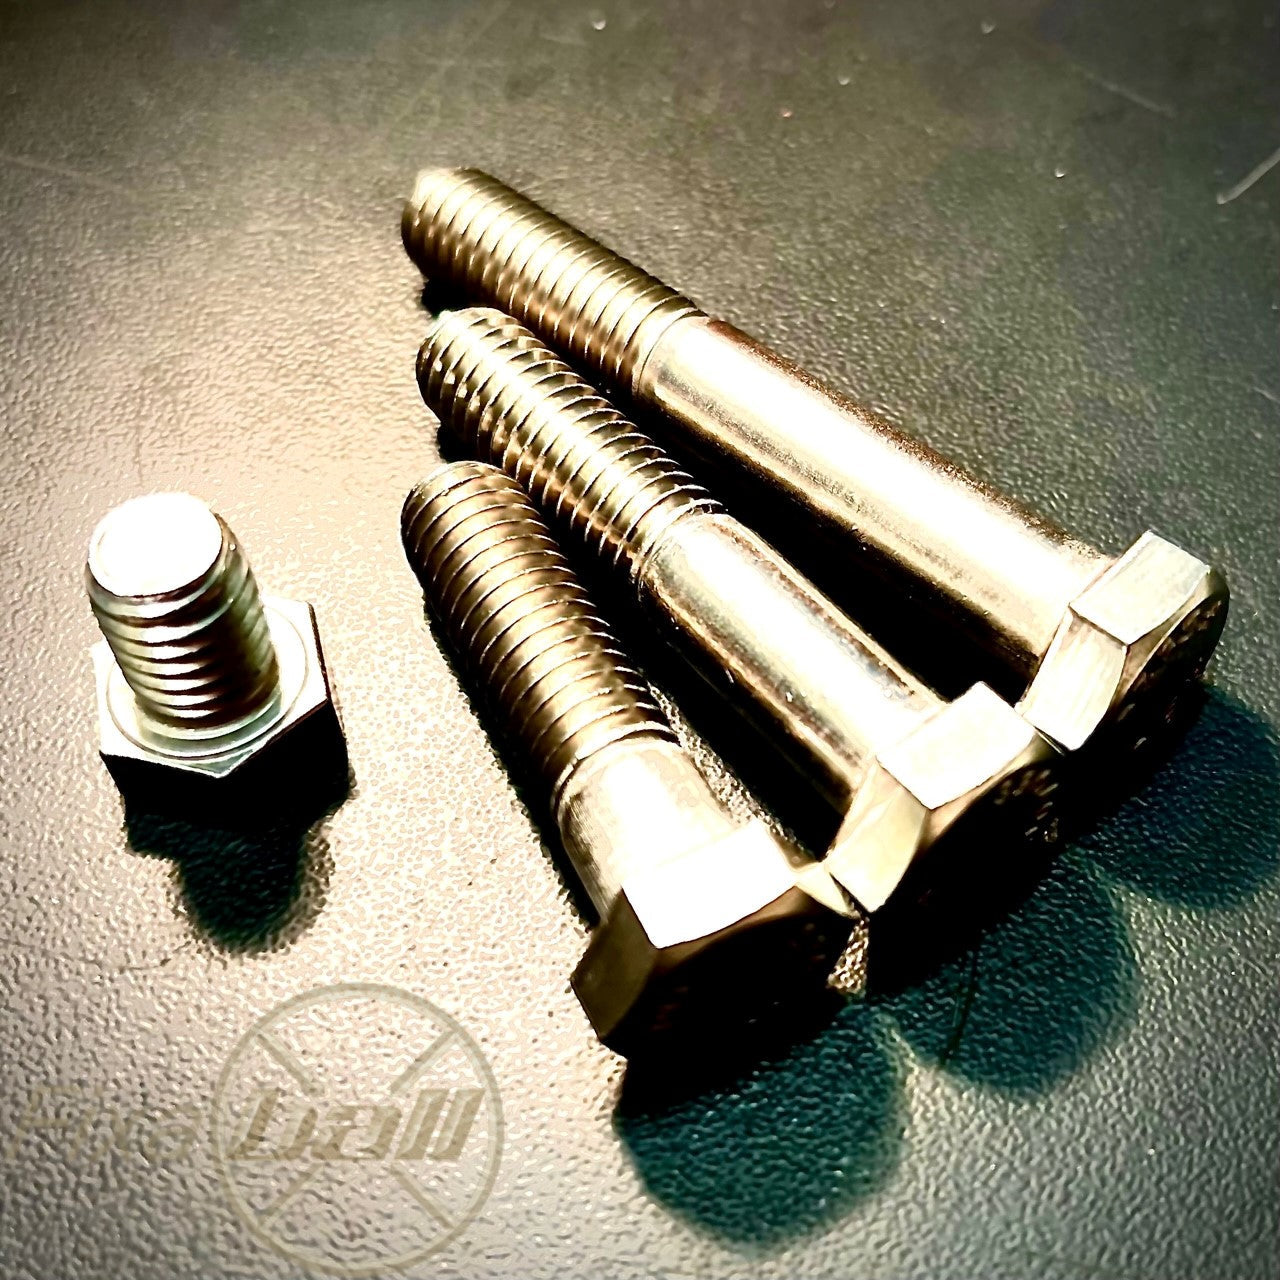 UNC 3/8", Hex Bolt and Hex Set Screw, A2/ 304 Stainless Steel, DIN 931. Hex-Bolt UNC 3/8", Hex Bolt and Hex Set Screw, A2/ 304 Stainless Steel, DIN 931. UNC, Hex-Bolt